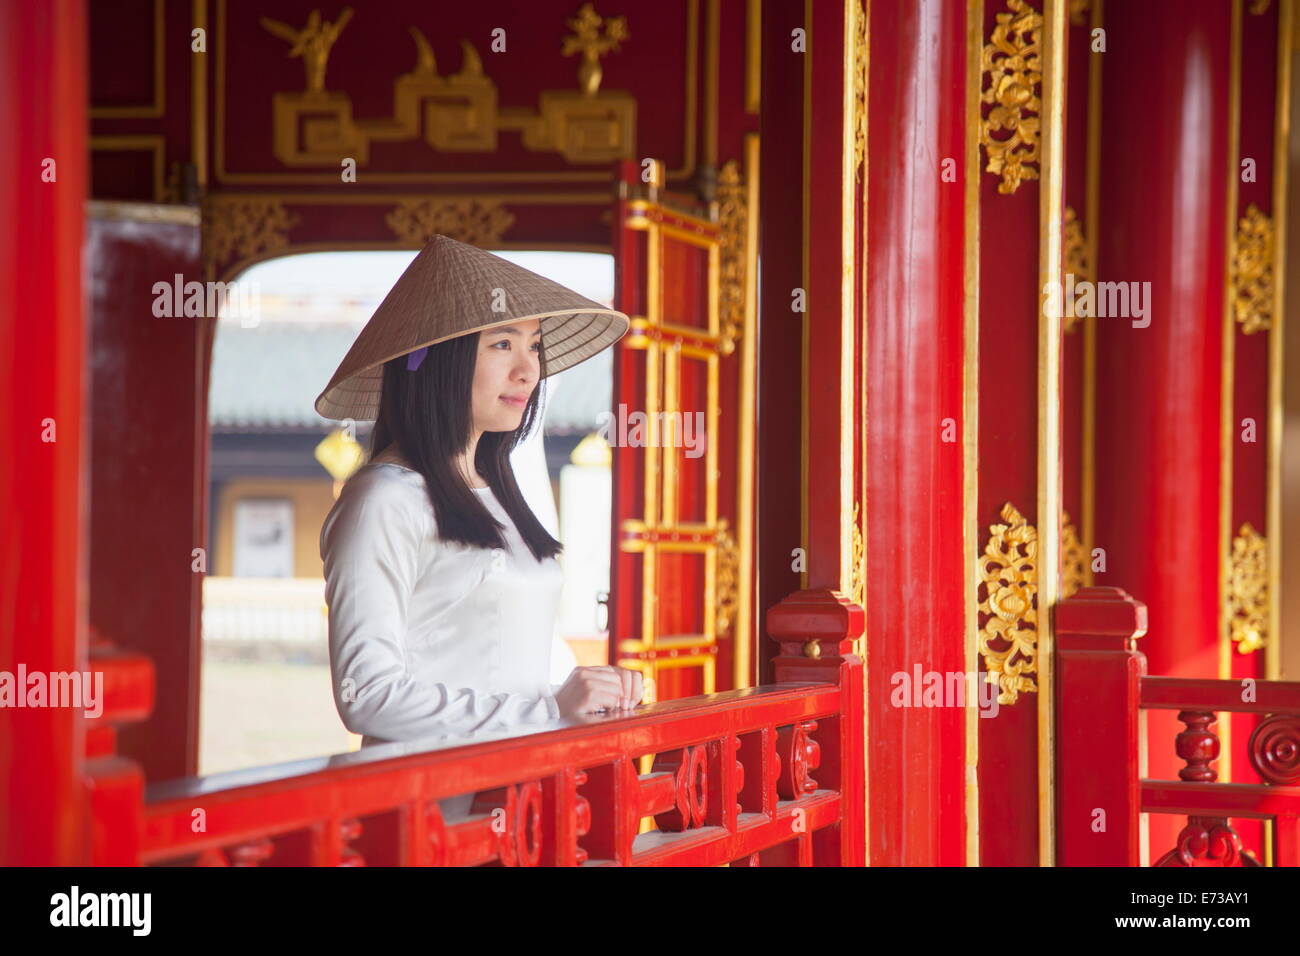 Woman wearing Ao Dai dress in Imperial Palace inside Citadel, Hue, Thua Thien-Hue, Vietnam, Indochina, Southeast Asia, Asia Stock Photo